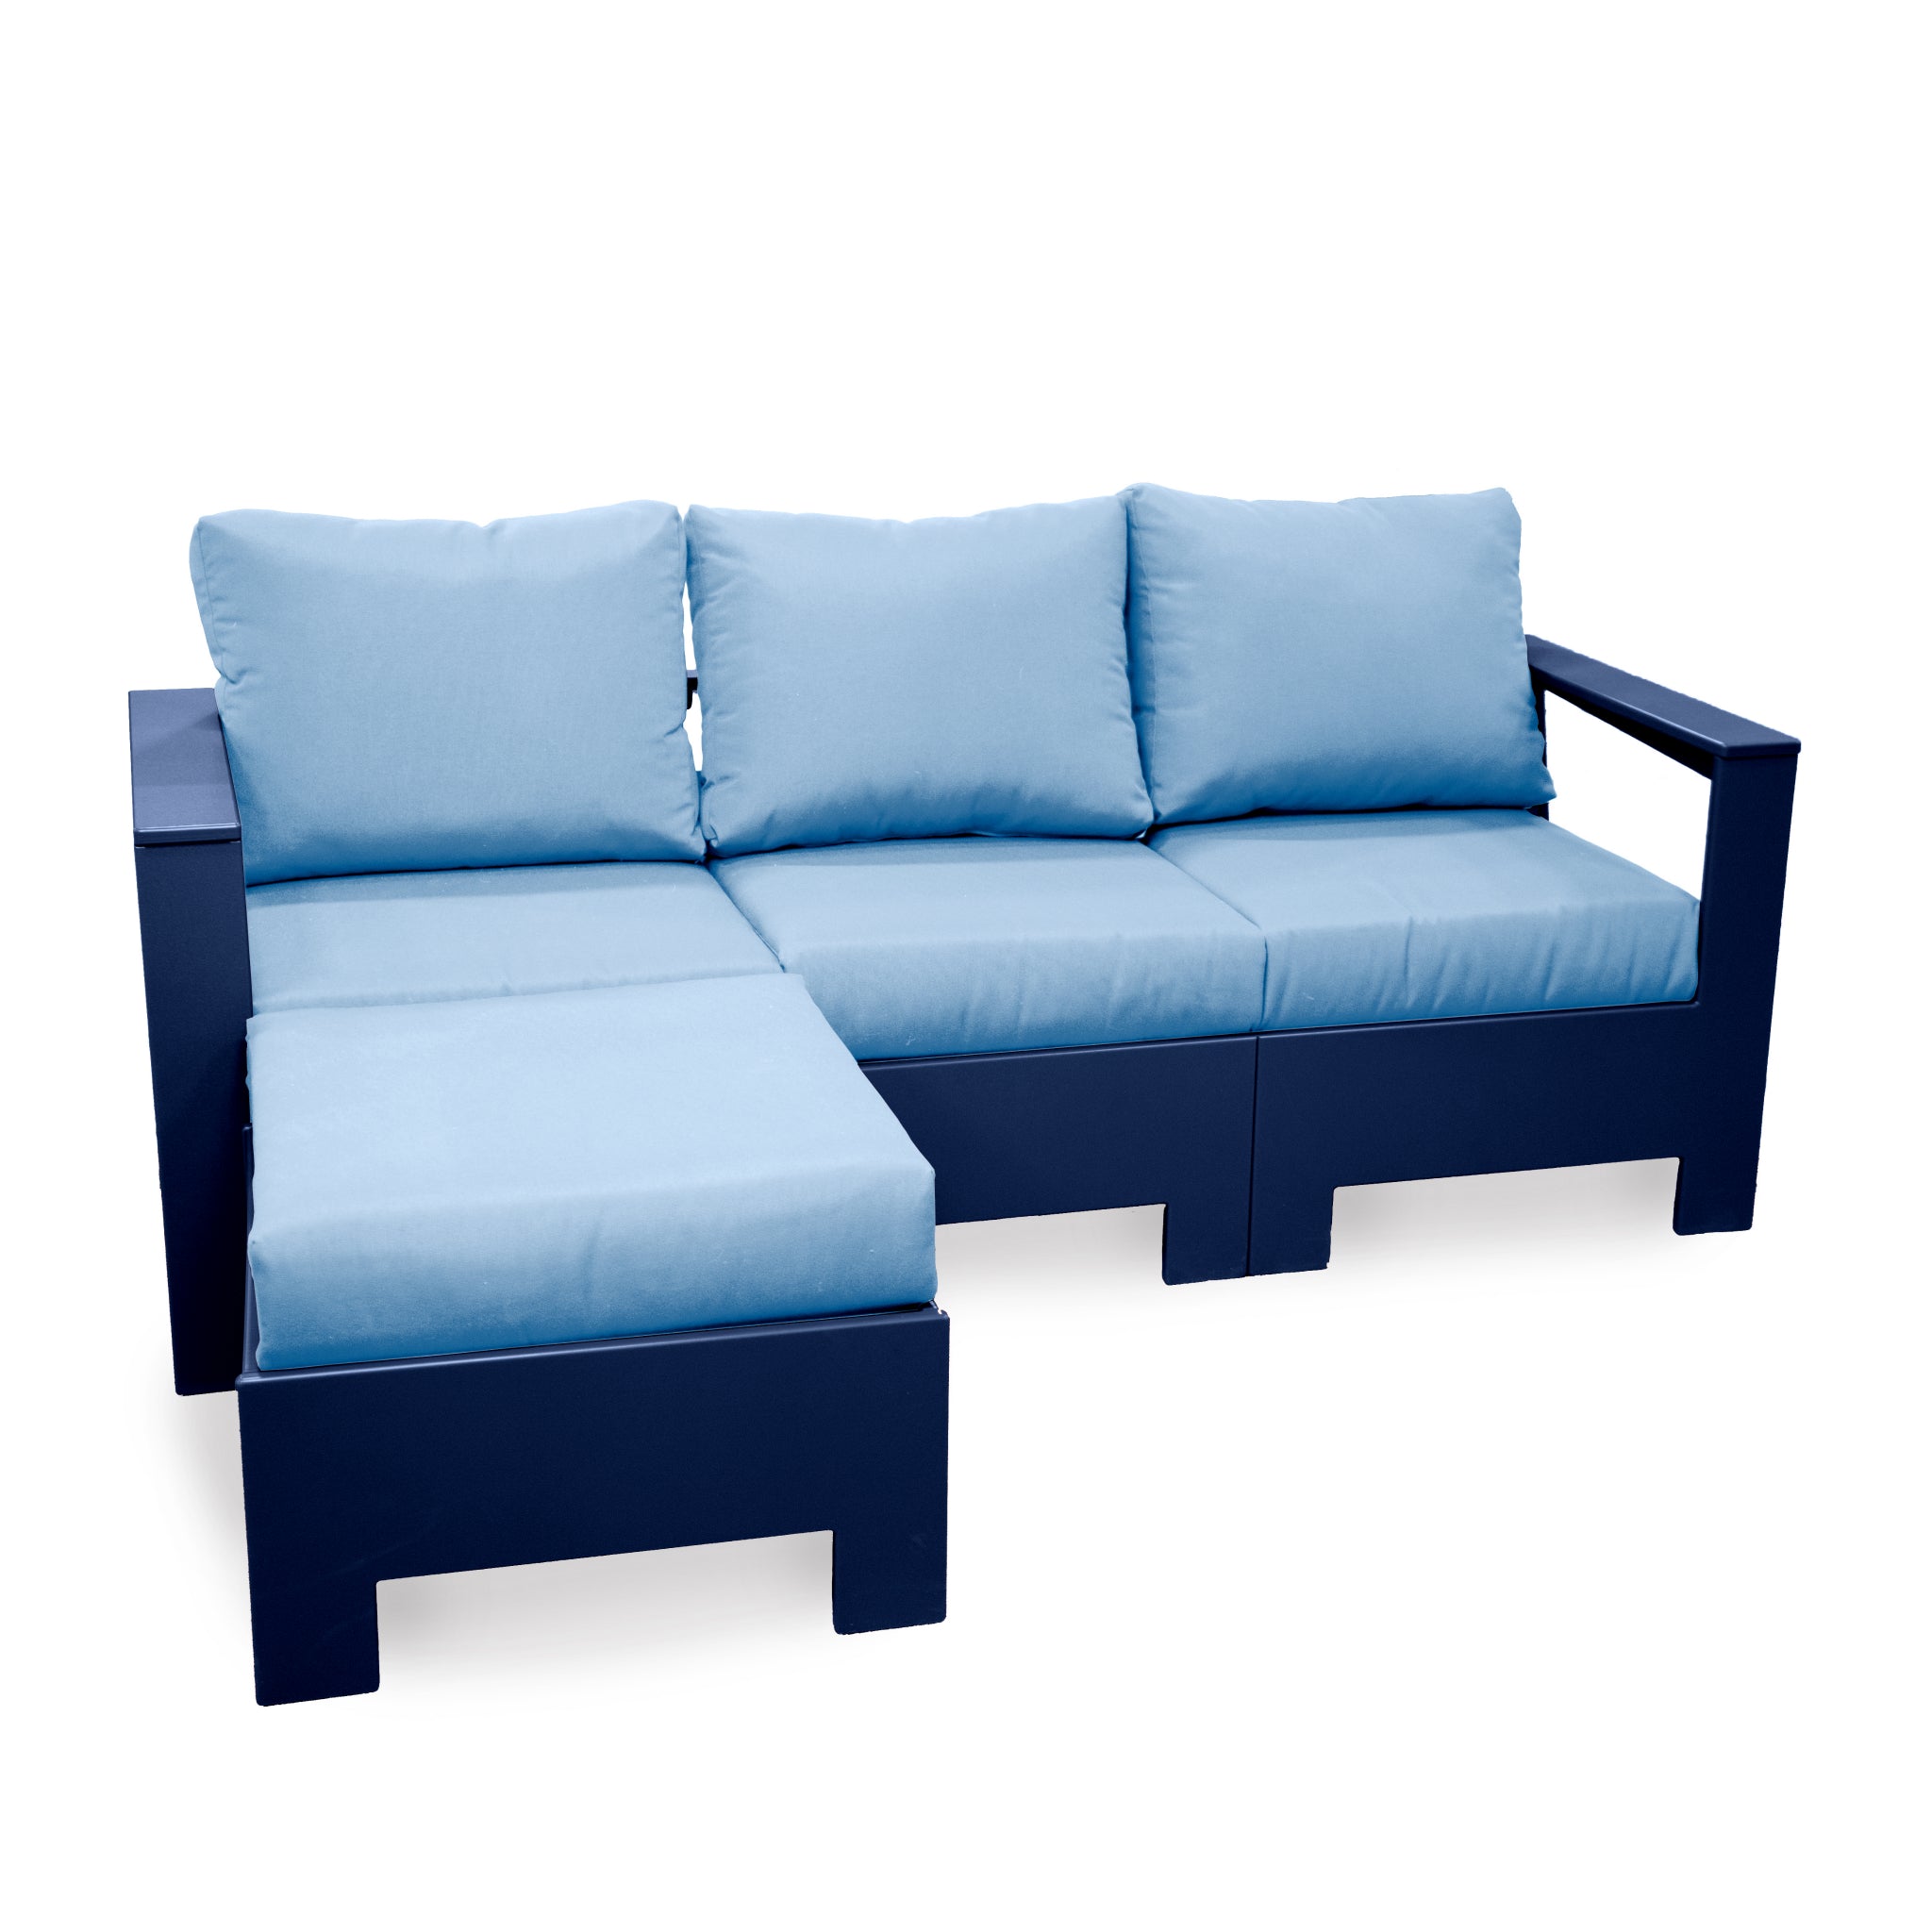 Deep-Seated Sectional Set 3